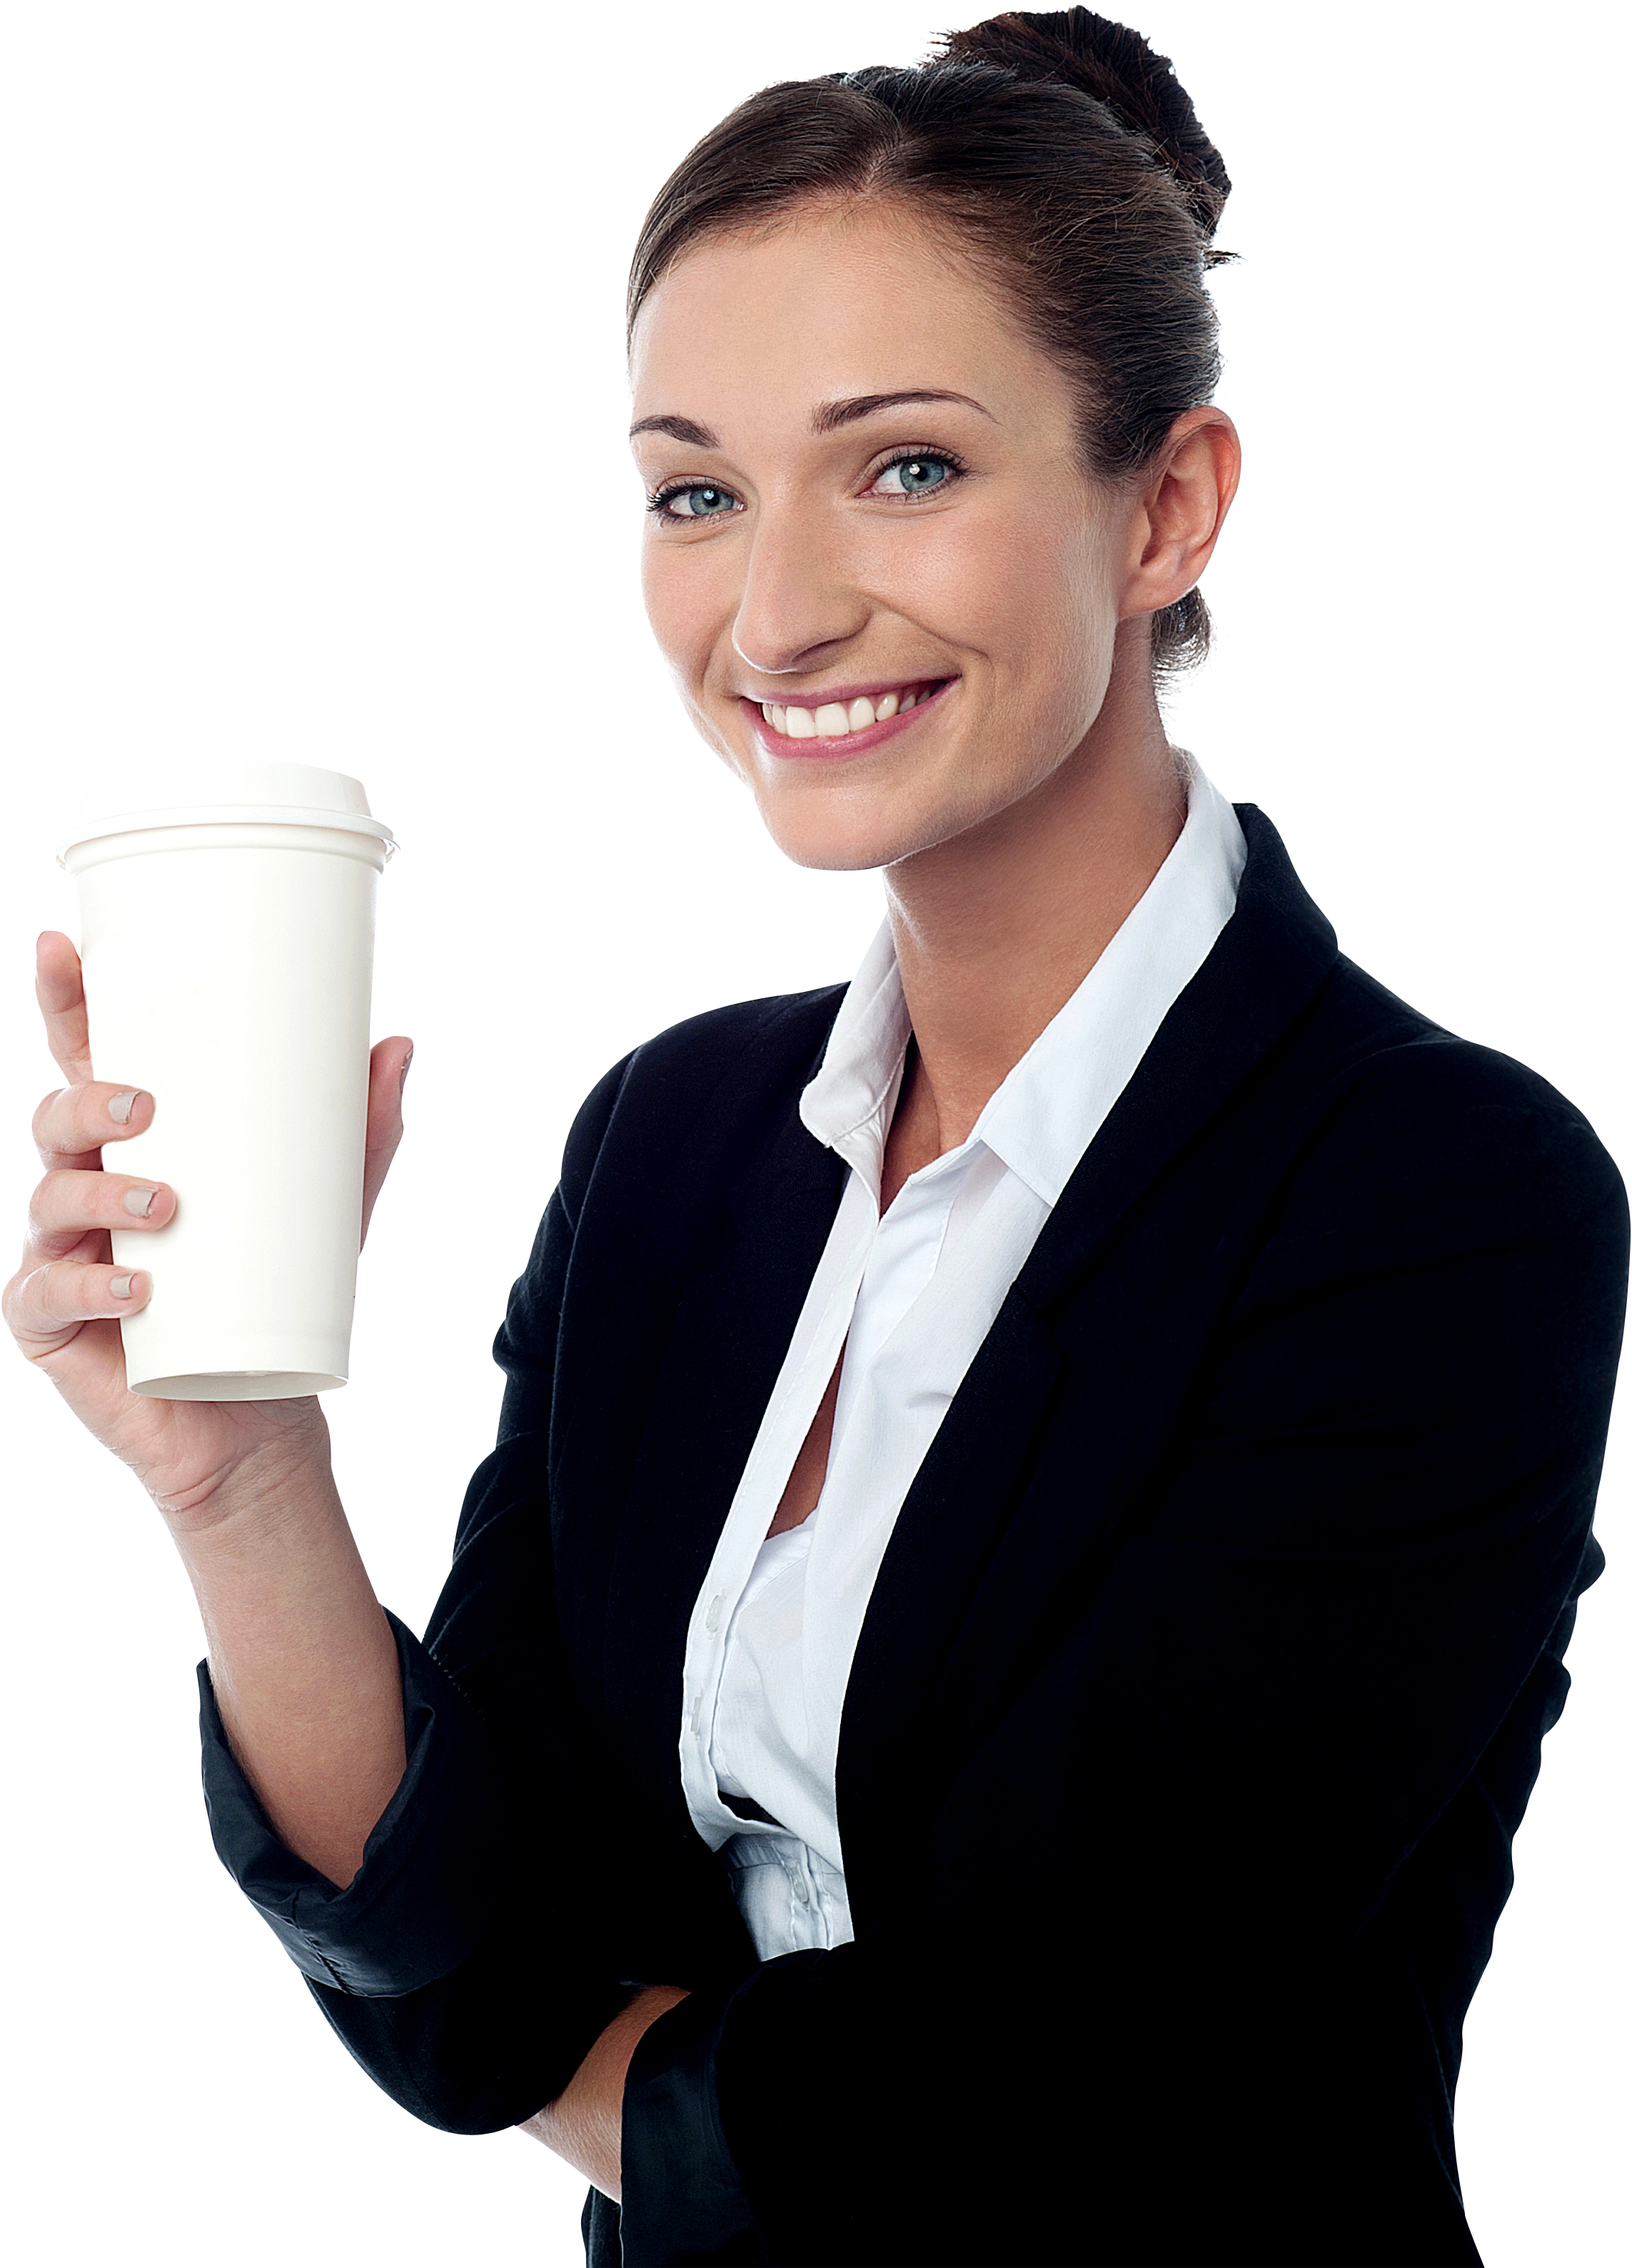 Smiling Business Woman PNG Clipart